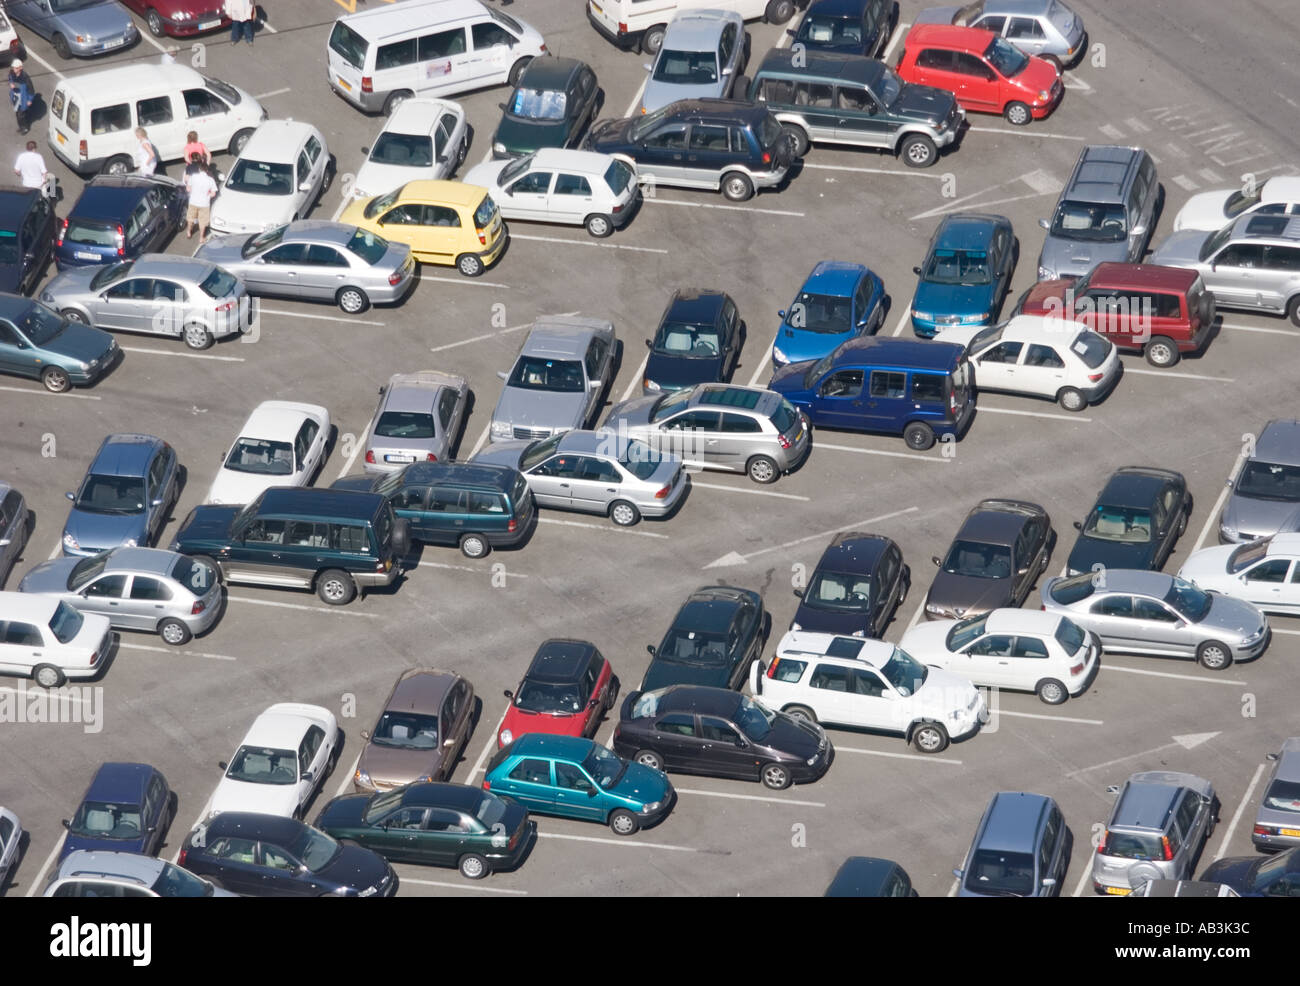 Aerial view of motor cars in car parking lot Gibraltar Stock Photo